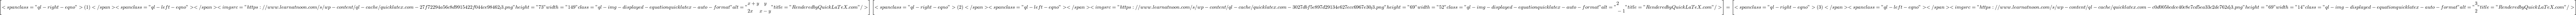 \[\left[ <span class="ql-right-eqno"> (1) </span><span class="ql-left-eqno">   </span><img src="https://www.learnatnoon.com/s/wp-content/ql-cache/quicklatex.com-27f72294a56c8d9915422f044ce98462_l3.png" height="73" width="149" class="ql-img-displayed-equation quicklatex-auto-format" alt="\begin{align*}   & x+y\,\,\,\,\,\,y \\   & 2x\,\,\,\,\,\,\,\,x-y \\  \end{align*}" title="Rendered by QuickLaTeX.com"/> \right]\left[ <span class="ql-right-eqno"> (2) </span><span class="ql-left-eqno">   </span><img src="https://www.learnatnoon.com/s/wp-content/ql-cache/quicklatex.com-3027dbf5c897d29134e627ecc6967e30_l3.png" height="69" width="52" class="ql-img-displayed-equation quicklatex-auto-format" alt="\begin{align*}   & 2 \\   & -1 \\  \end{align*}" title="Rendered by QuickLaTeX.com"/> \right]=\left[ <span class="ql-right-eqno"> (3) </span><span class="ql-left-eqno">   </span><img src="https://www.learnatnoon.com/s/wp-content/ql-cache/quicklatex.com-c0d005bcdce40c8e7cd5ea33c2de762d_l3.png" height="69" width="14" class="ql-img-displayed-equation quicklatex-auto-format" alt="\begin{align*}   & 3 \\   & 2 \\  \end{align*}" title="Rendered by QuickLaTeX.com"/> \right]\]